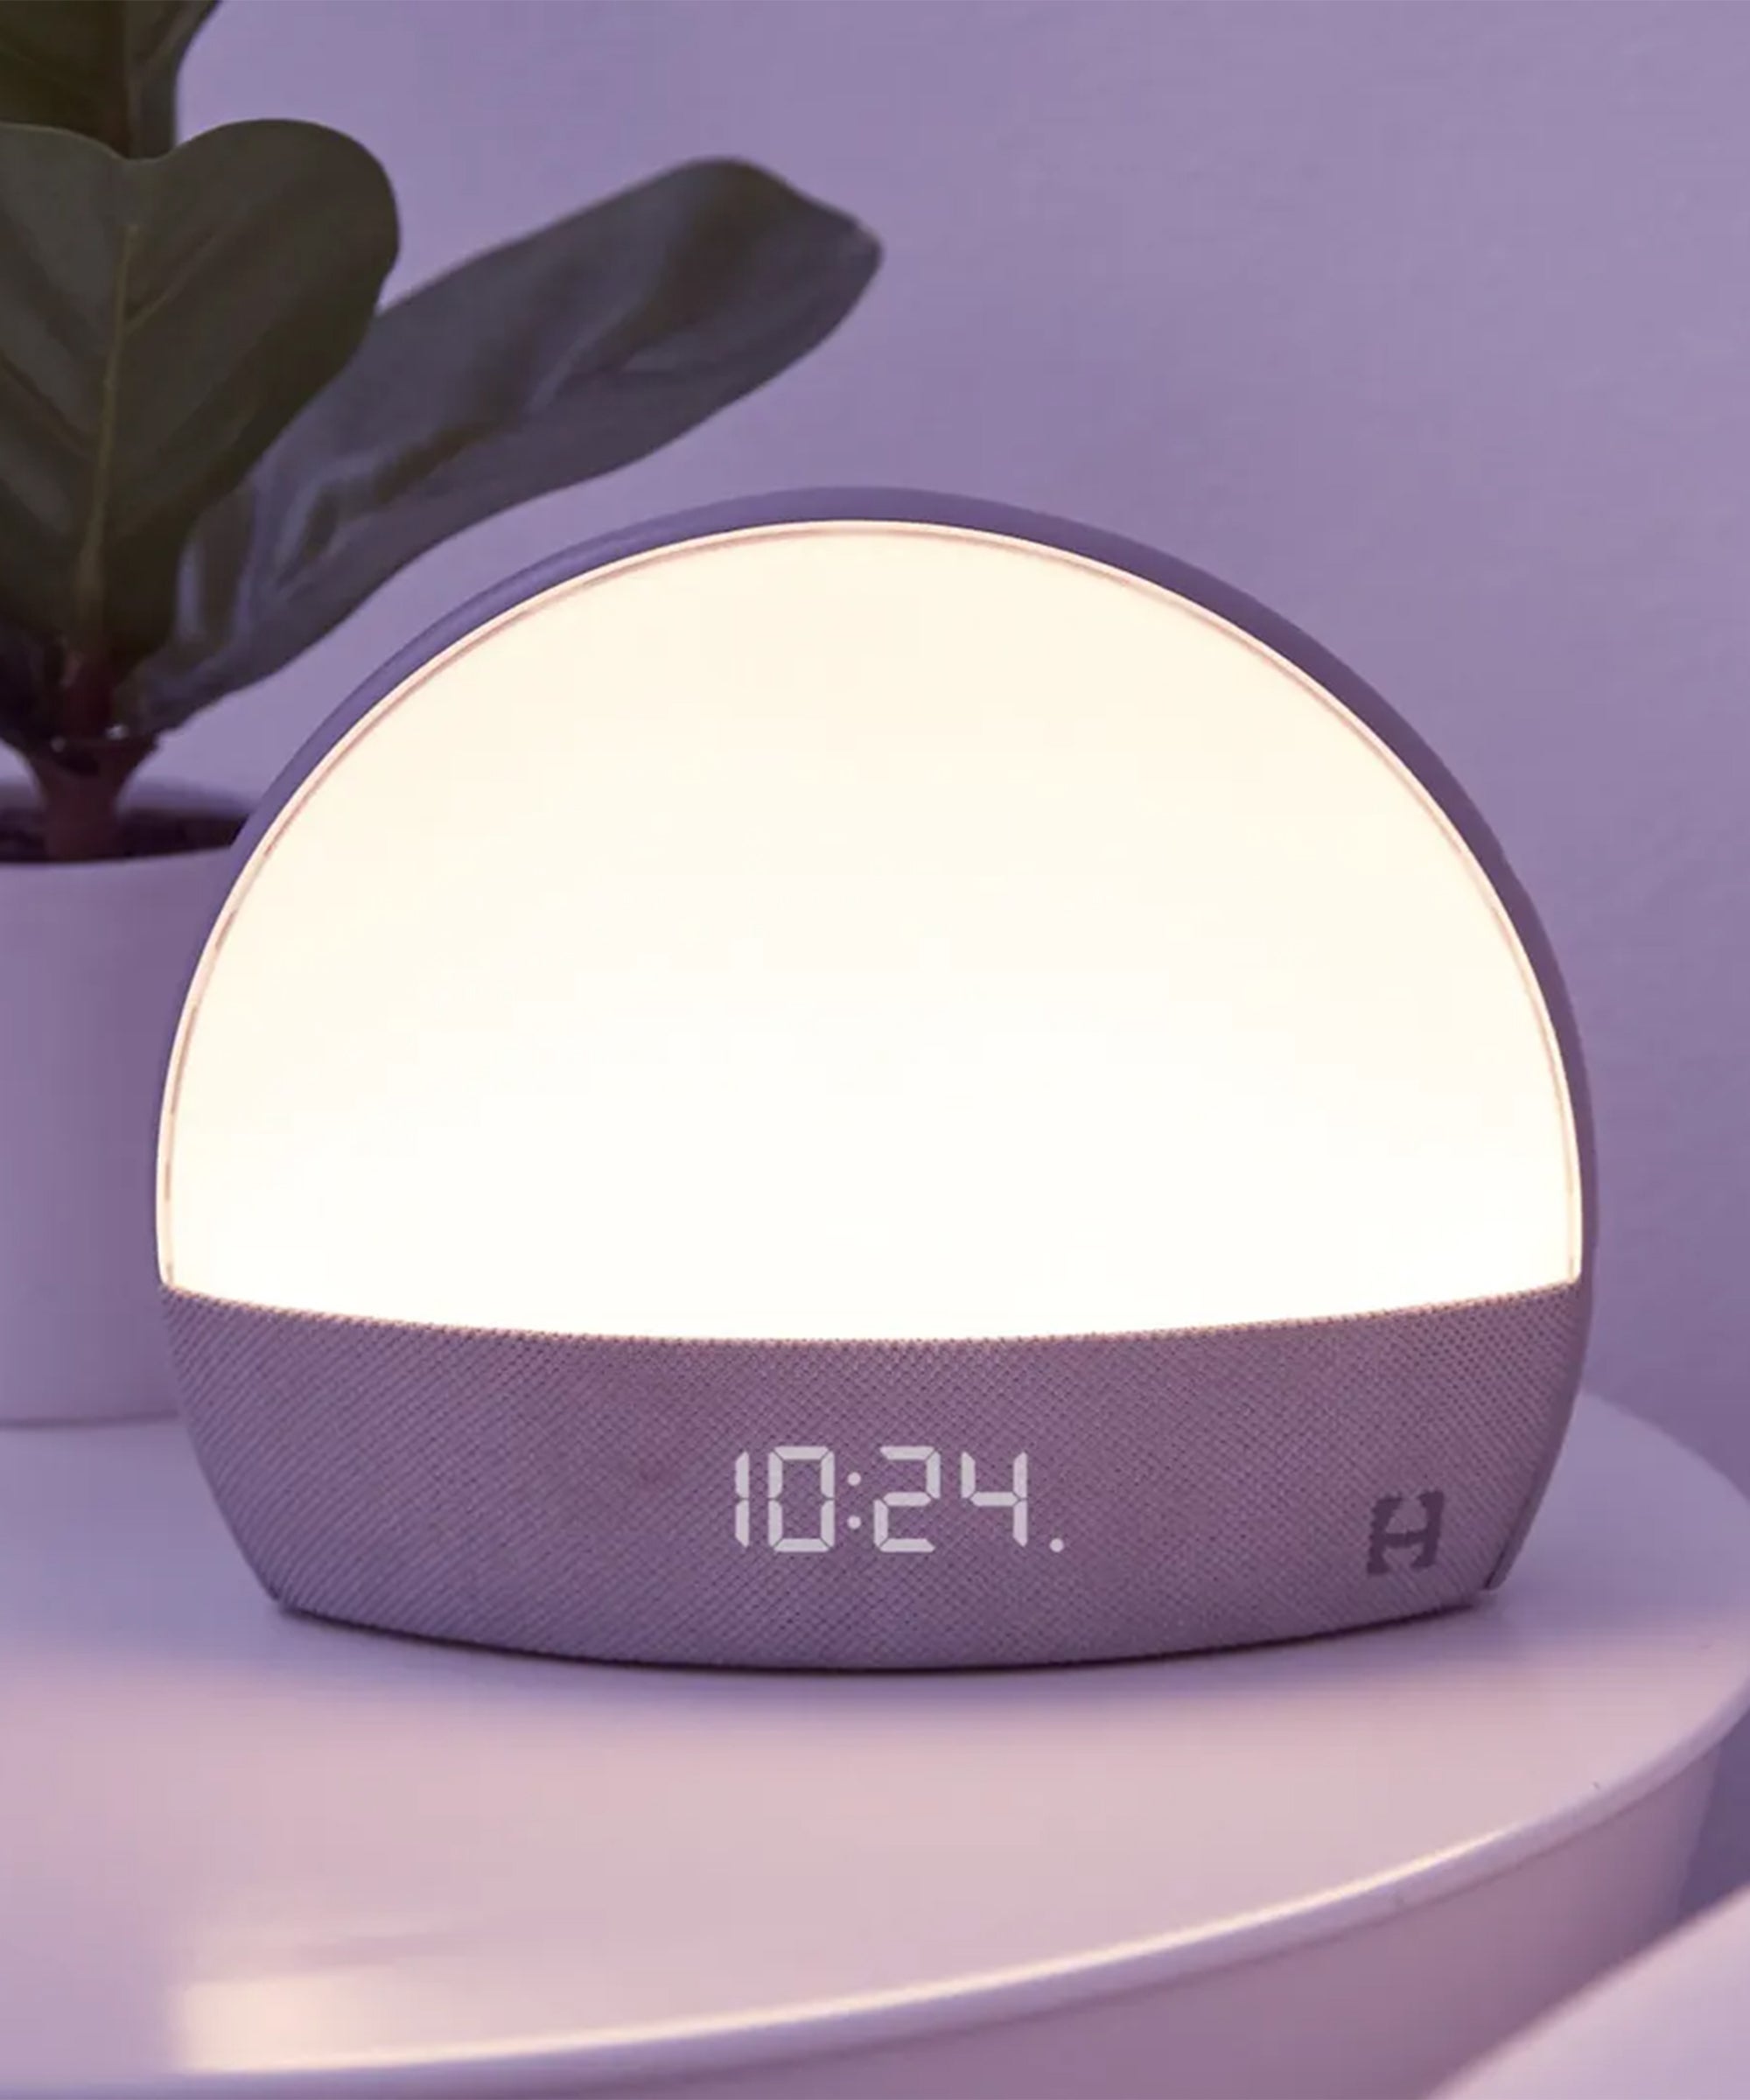 Best Sunrise Alarm Clocks With A Wake-Up Light Feature